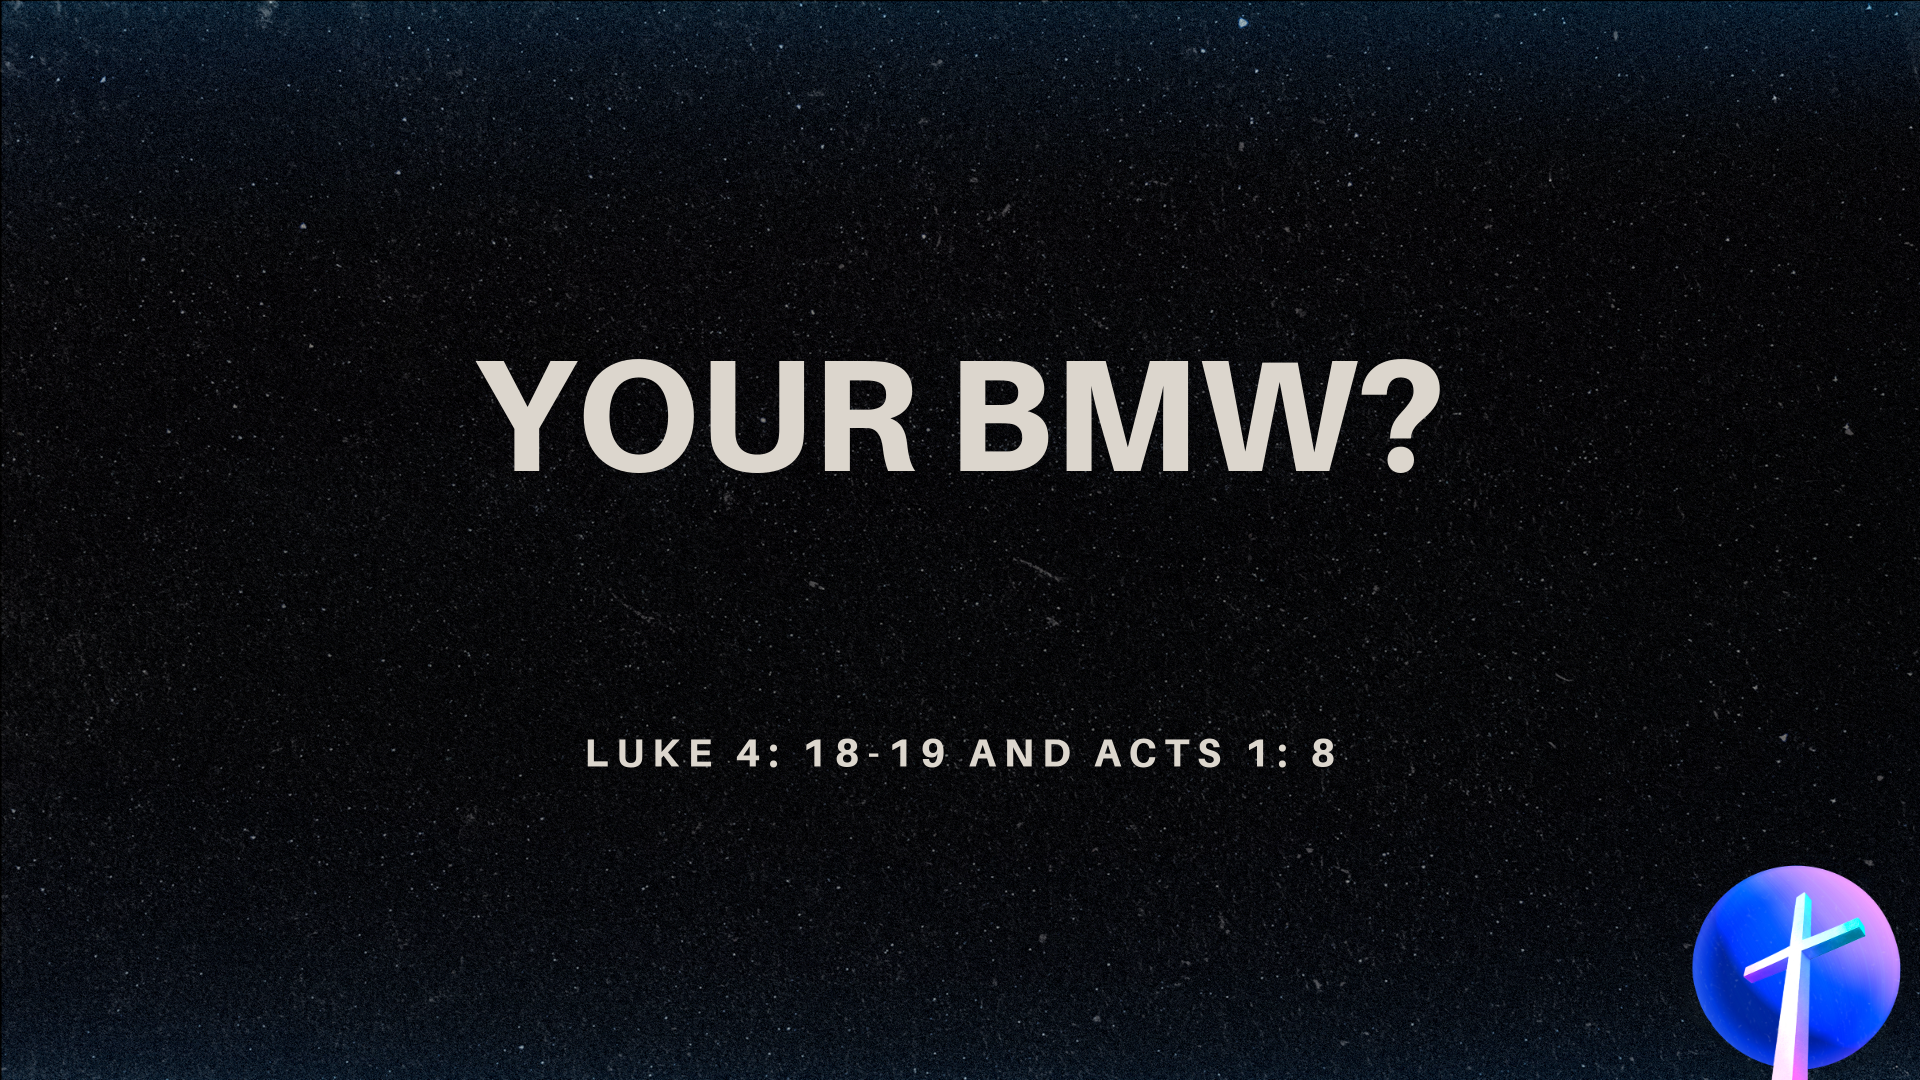 Aug 28, 2022 - Your BMW?  (Video) - Luke 4: 18-19; Acts 1:8